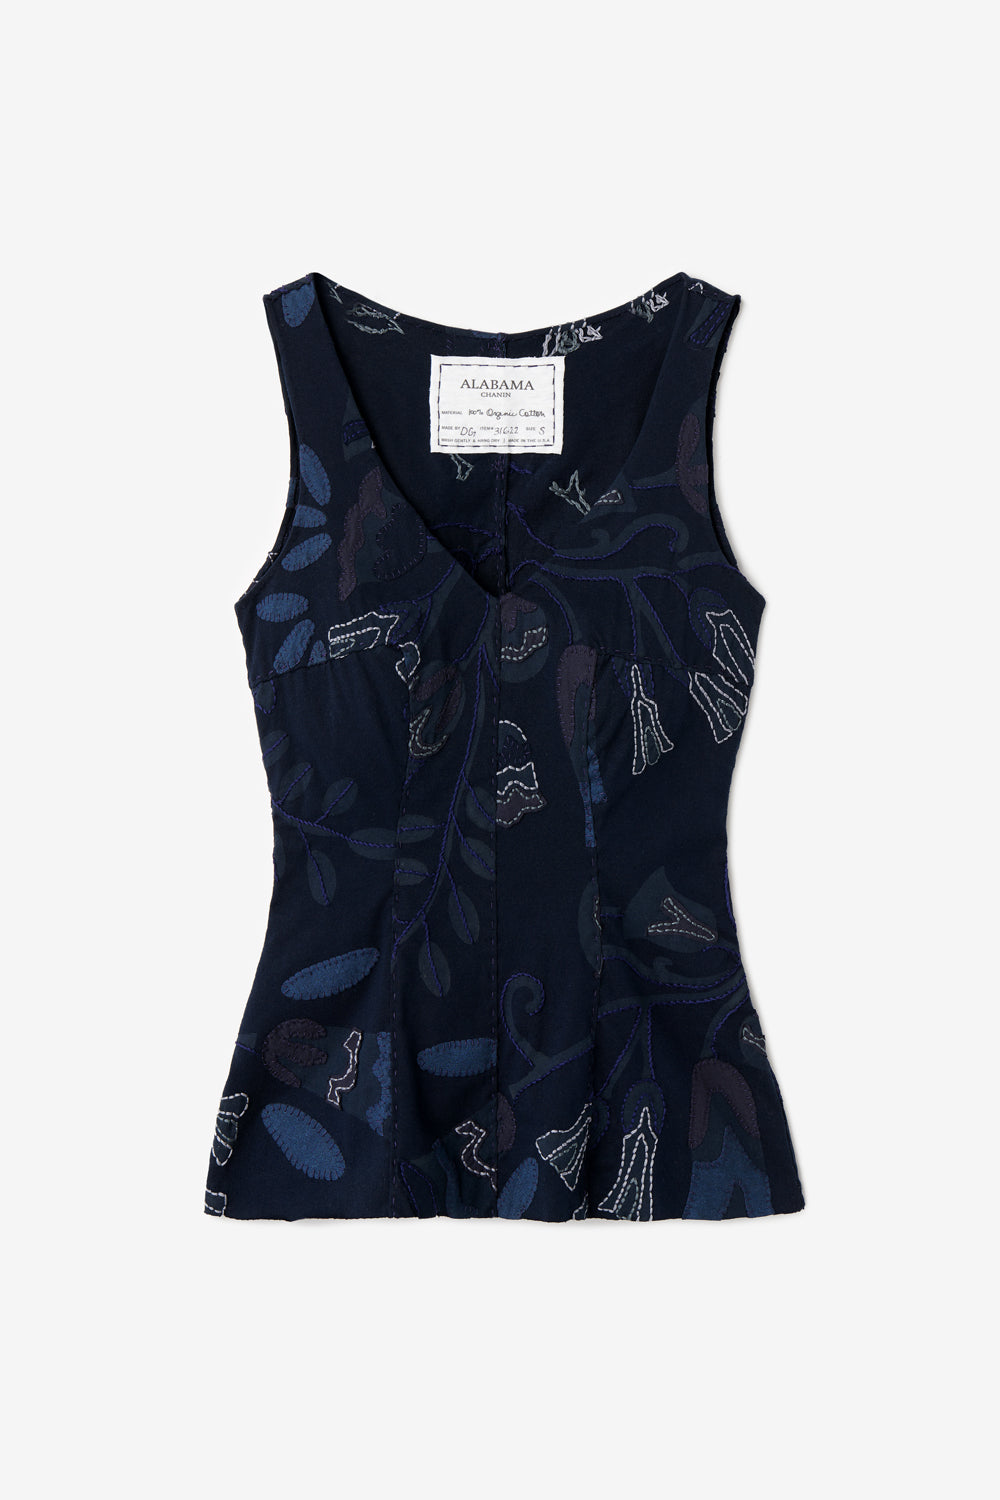 The Alex Top in hand-sewn organic cotton with floral appliqué. Shown in navy blue colorway.